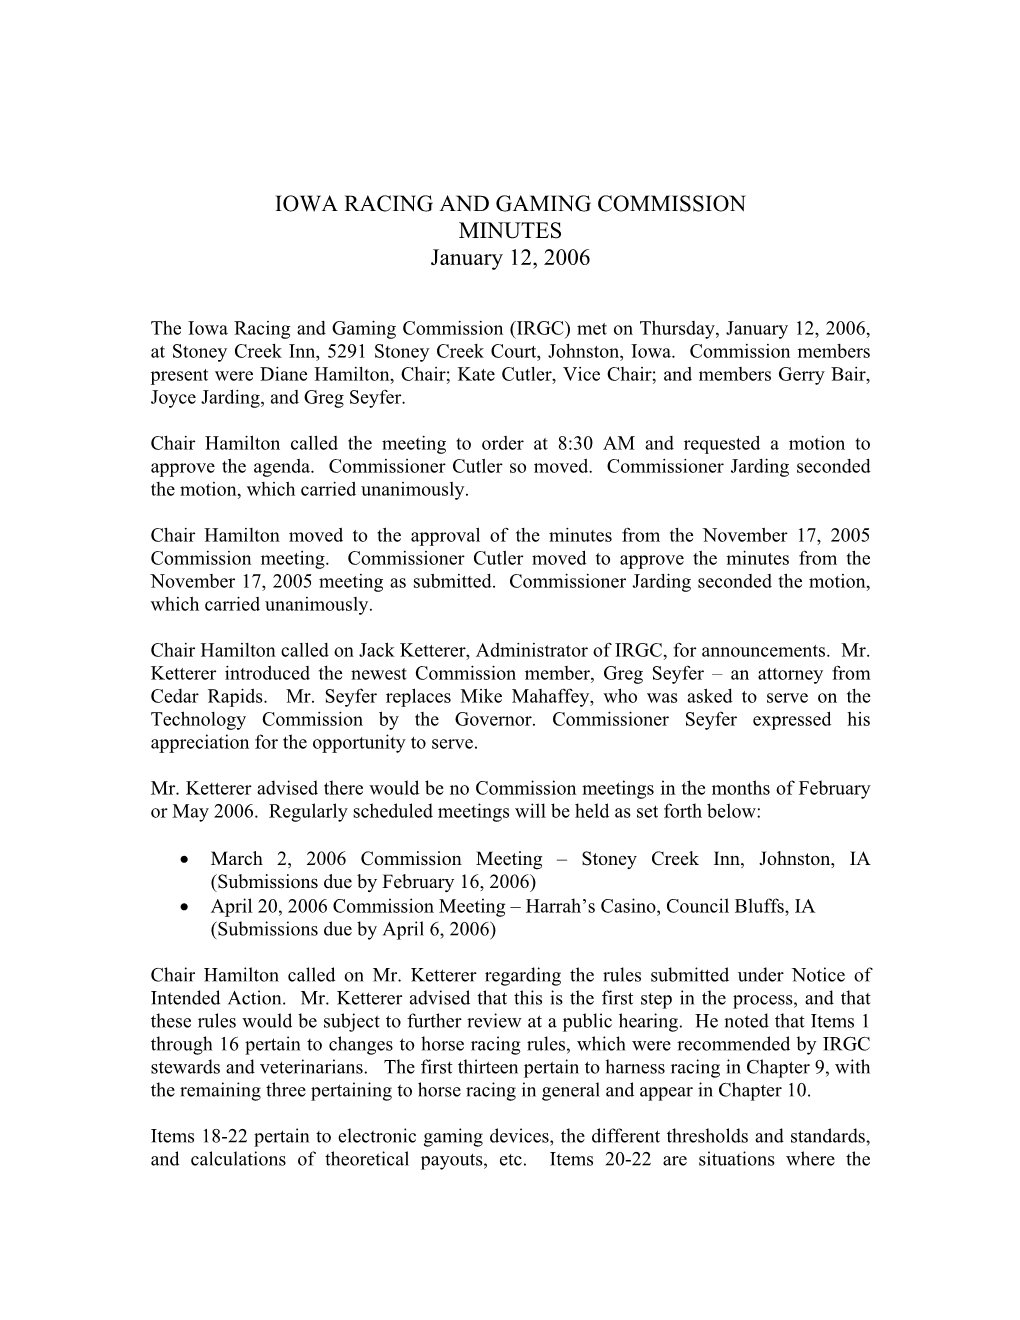 Iowa Racing and Gaming Commission Minutes March 2, 2006